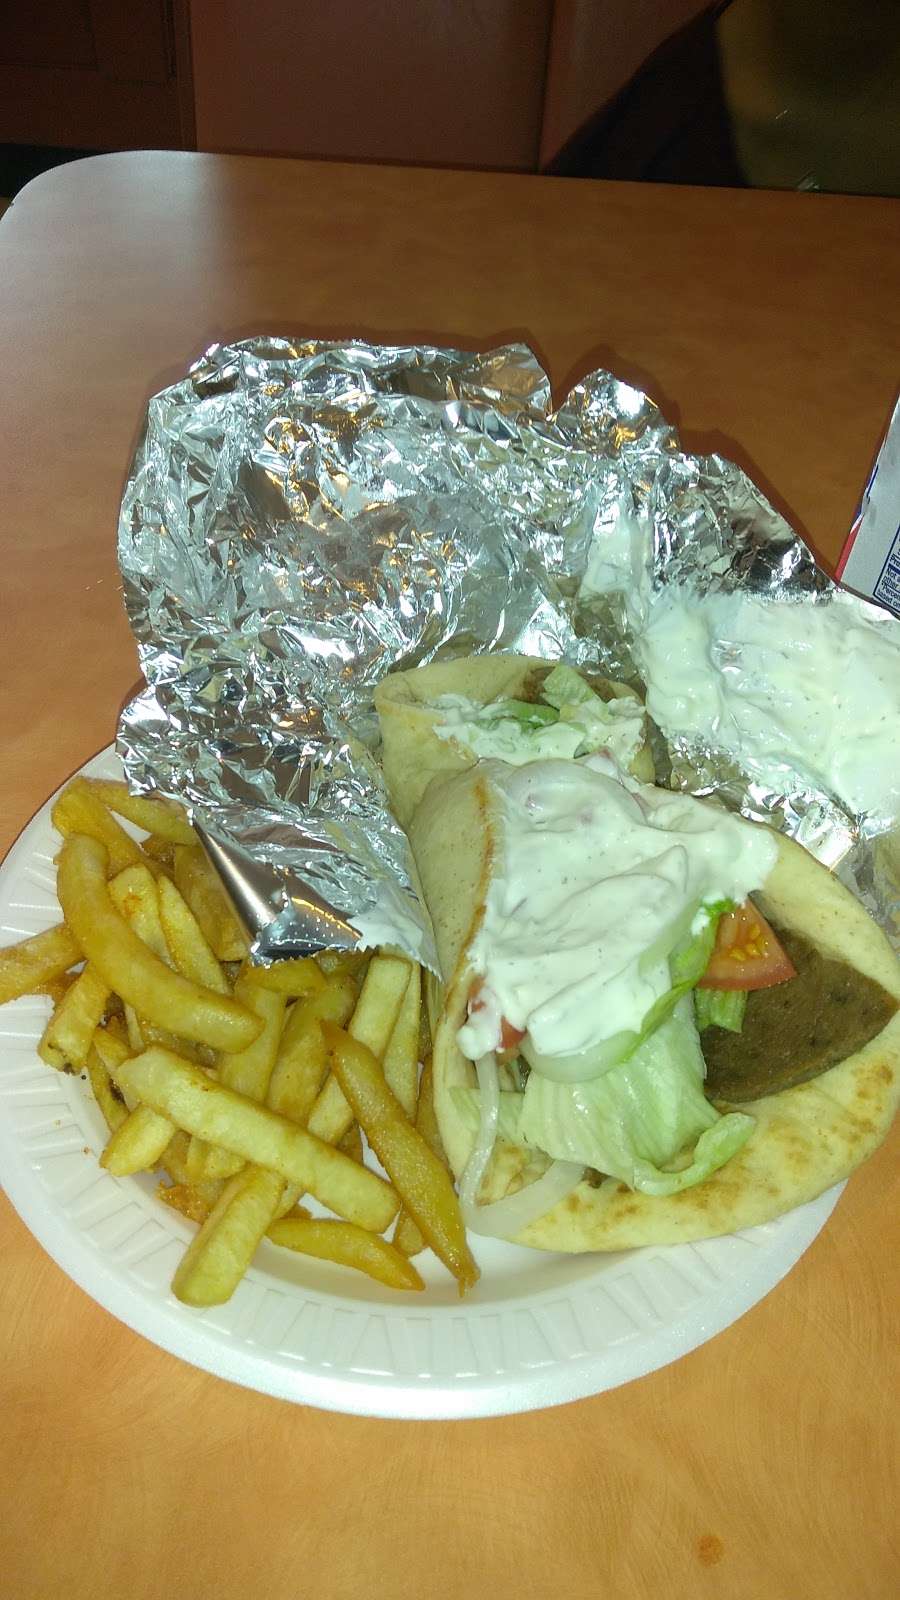 Afghan Chicken & Gyro | 444 Lancaster Ave, Reading, PA 19611 | Phone: (610) 743-3436